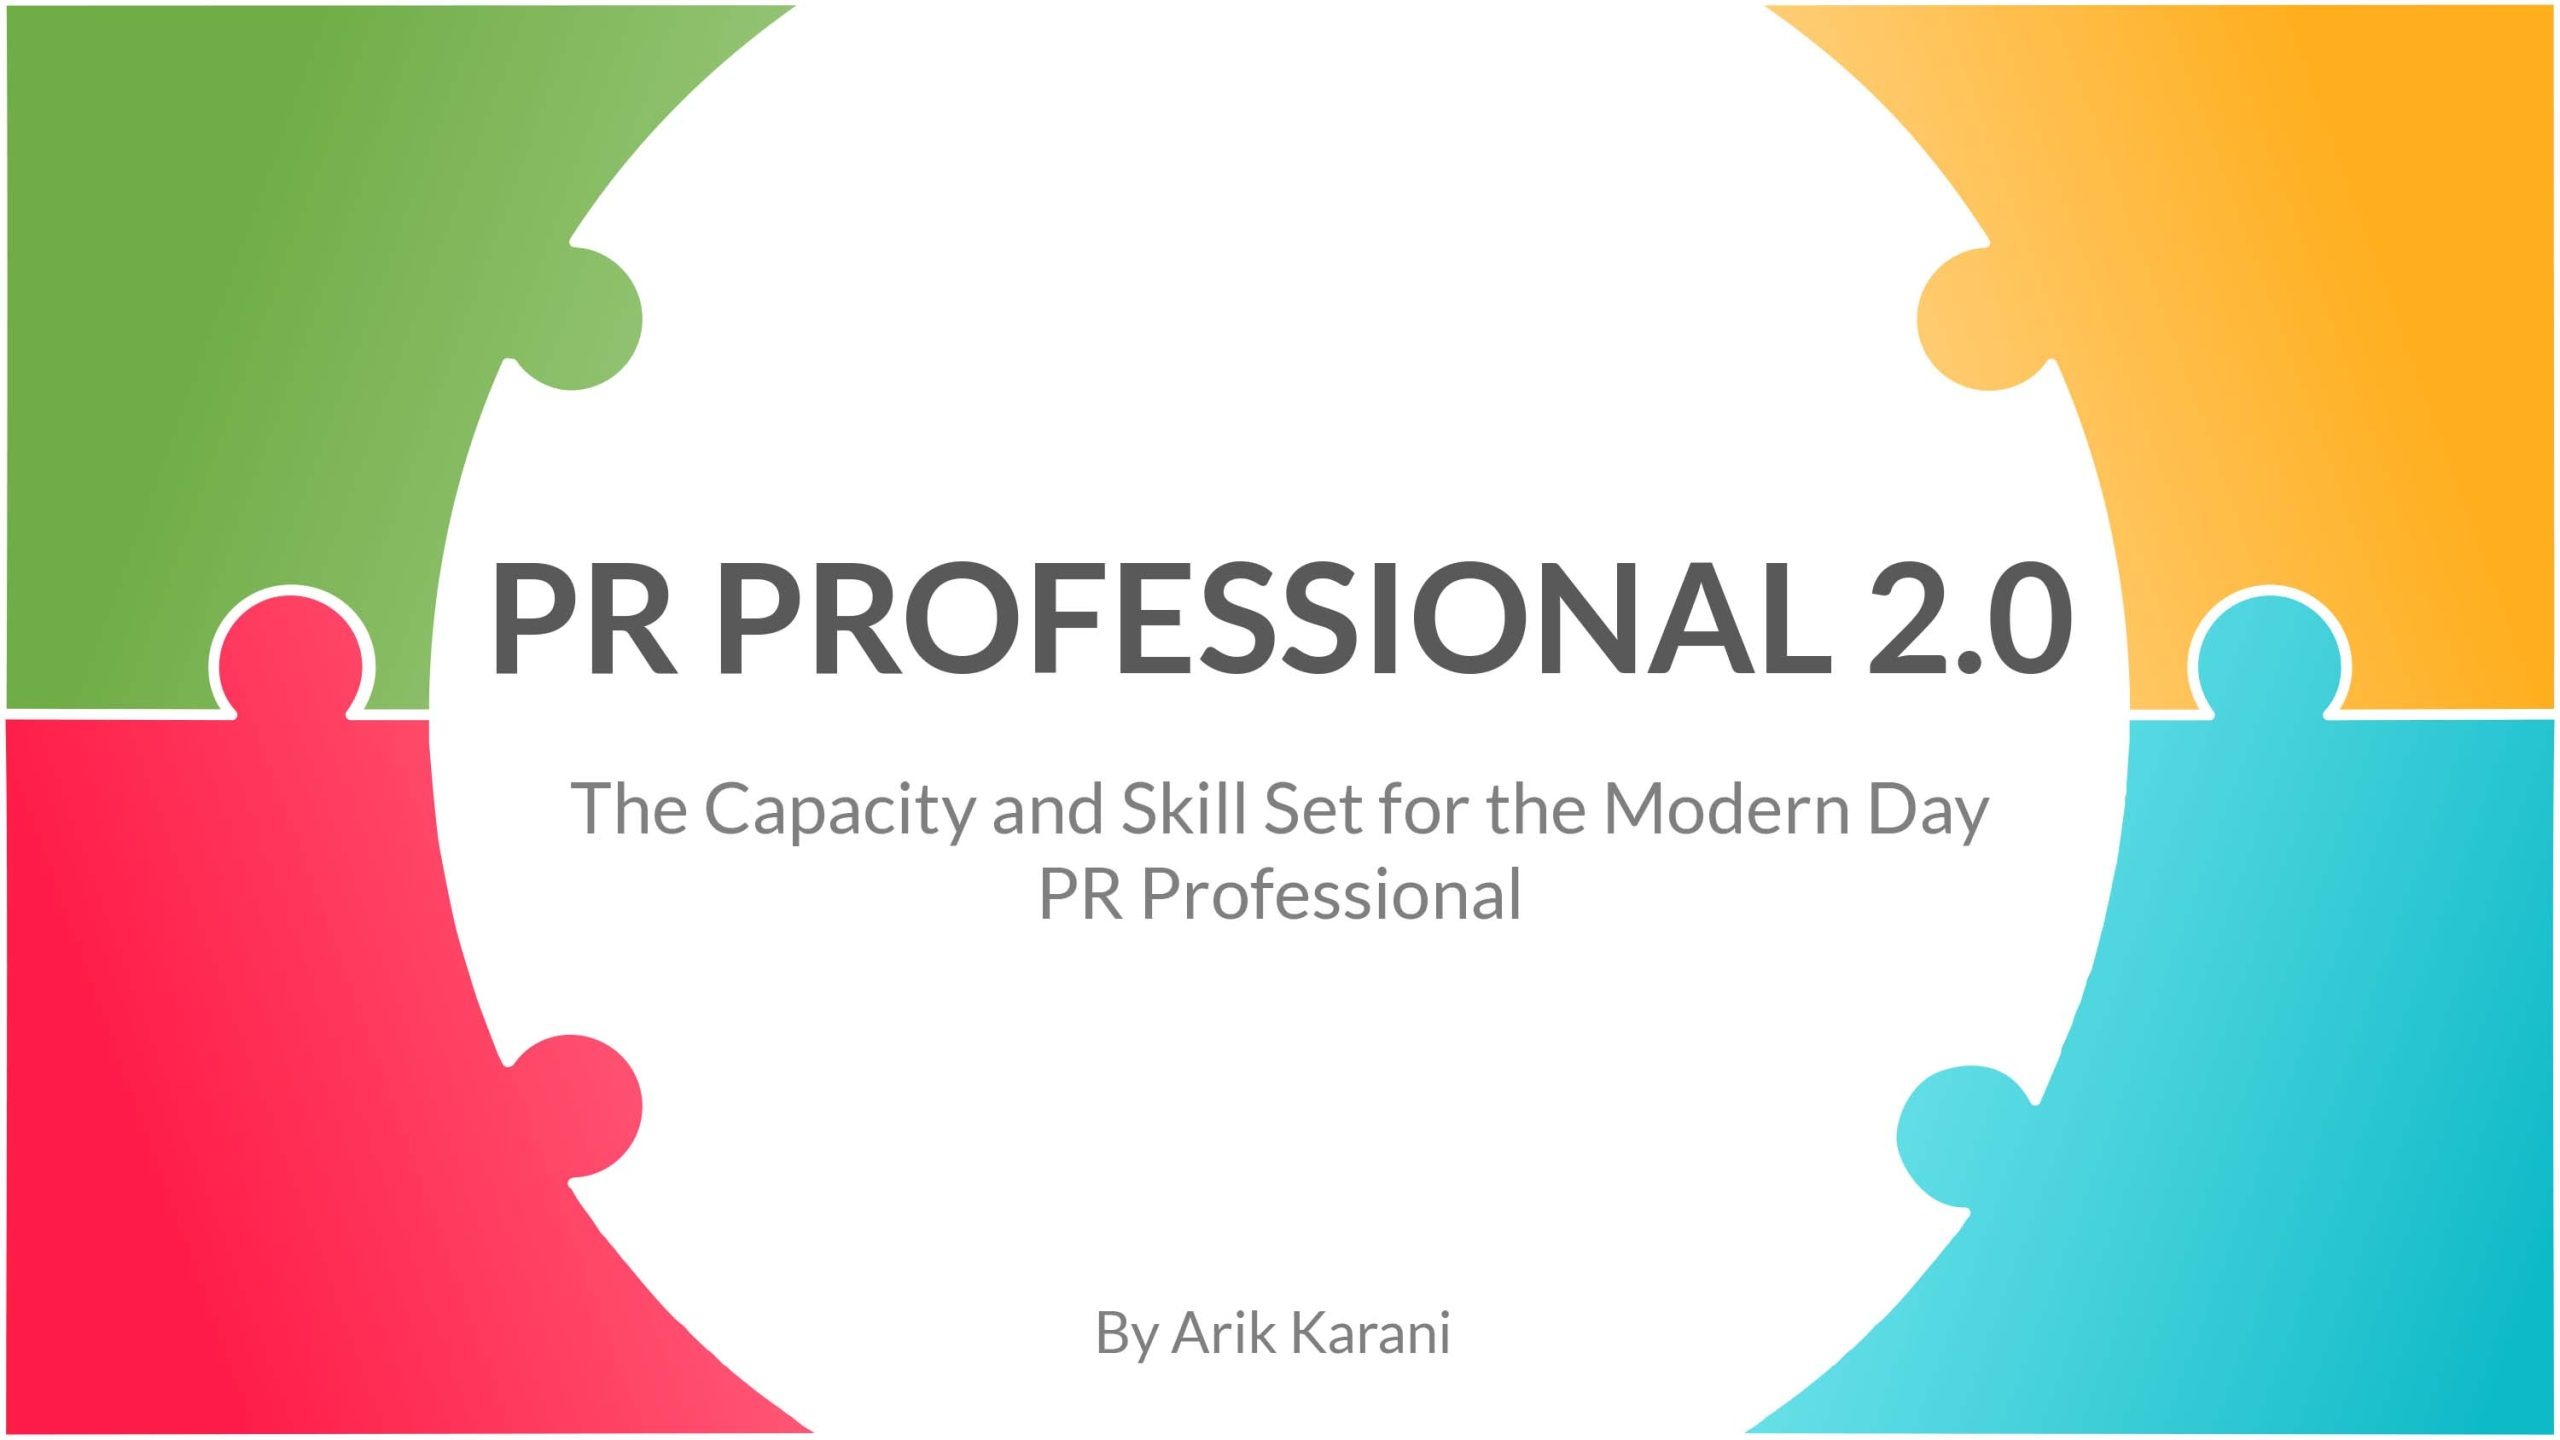 The Capacity and Skill Set for the Modern Day PR Professional